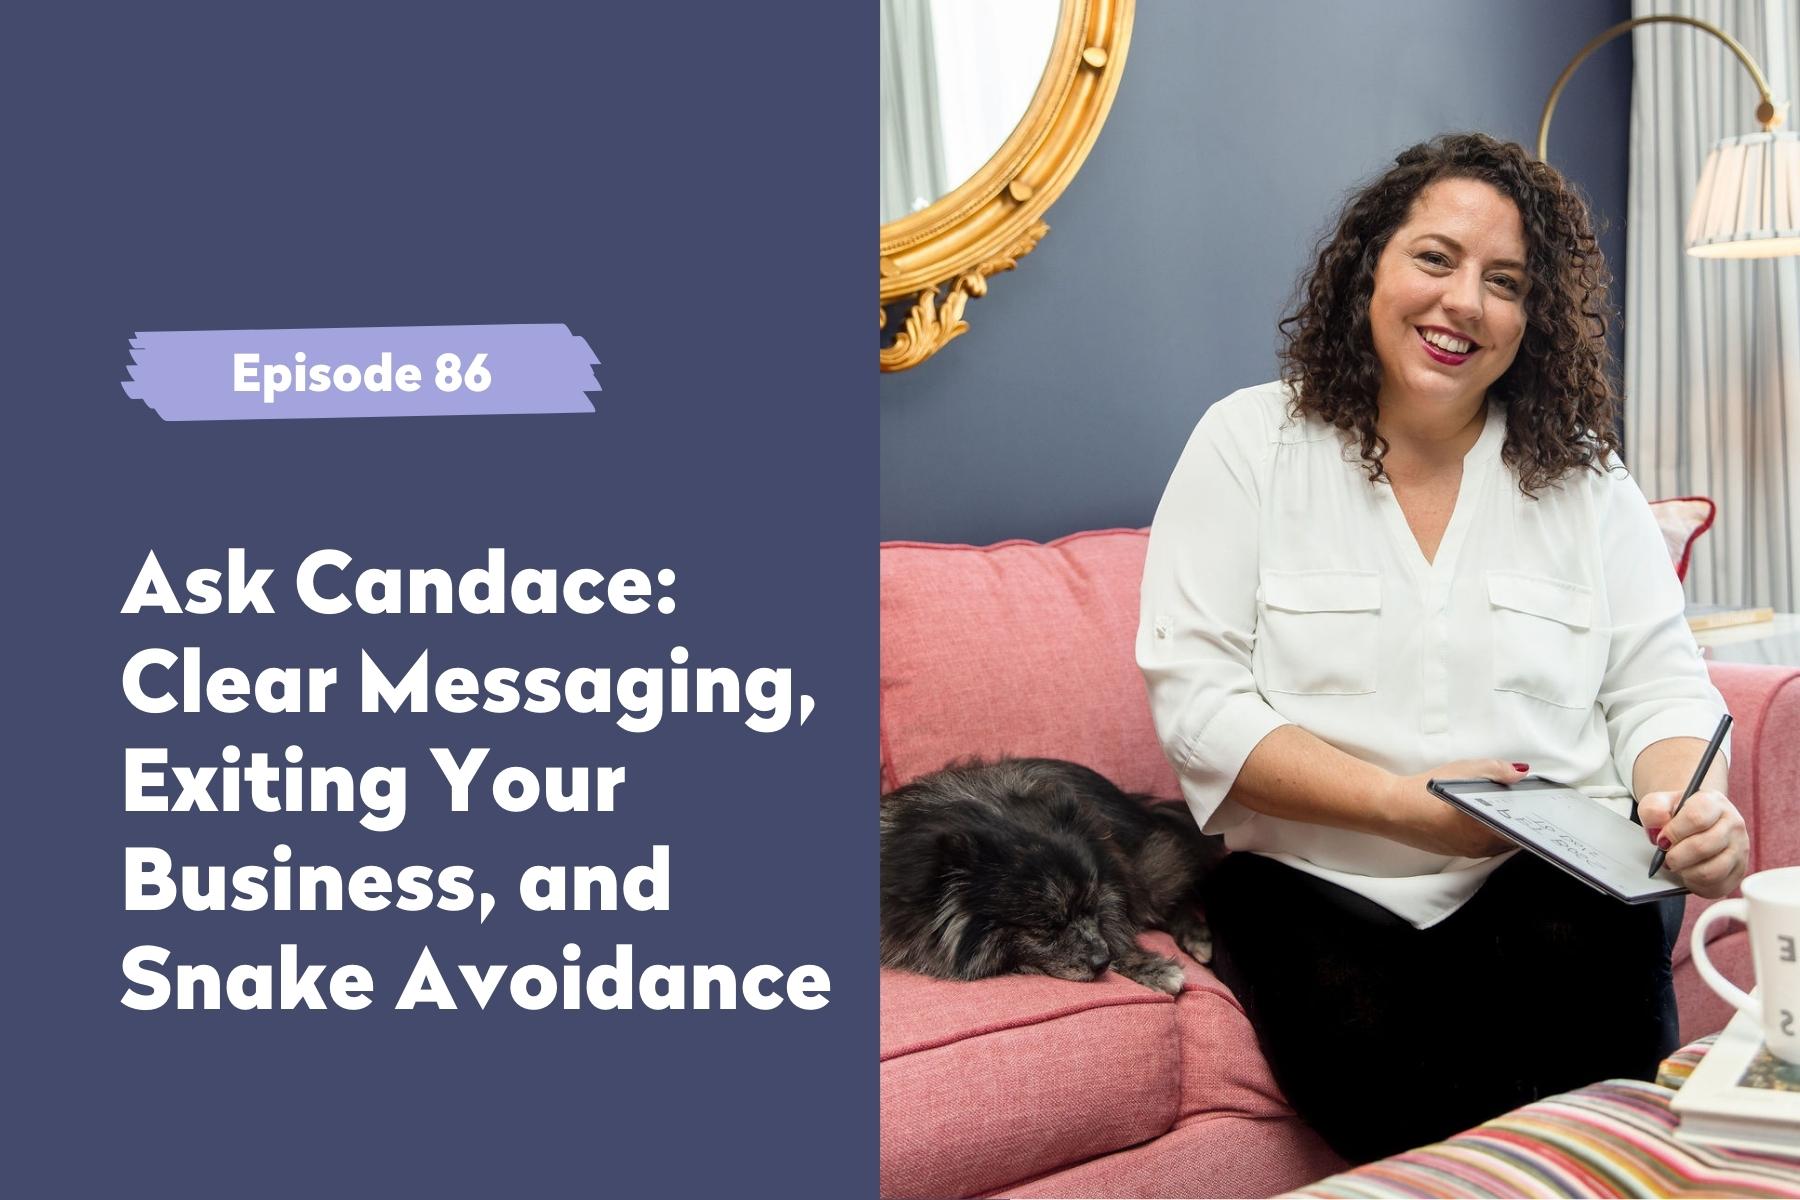 Episode 86 | Ask Candace: Clear Messaging, Exiting Your Business, and Snake Avoidance